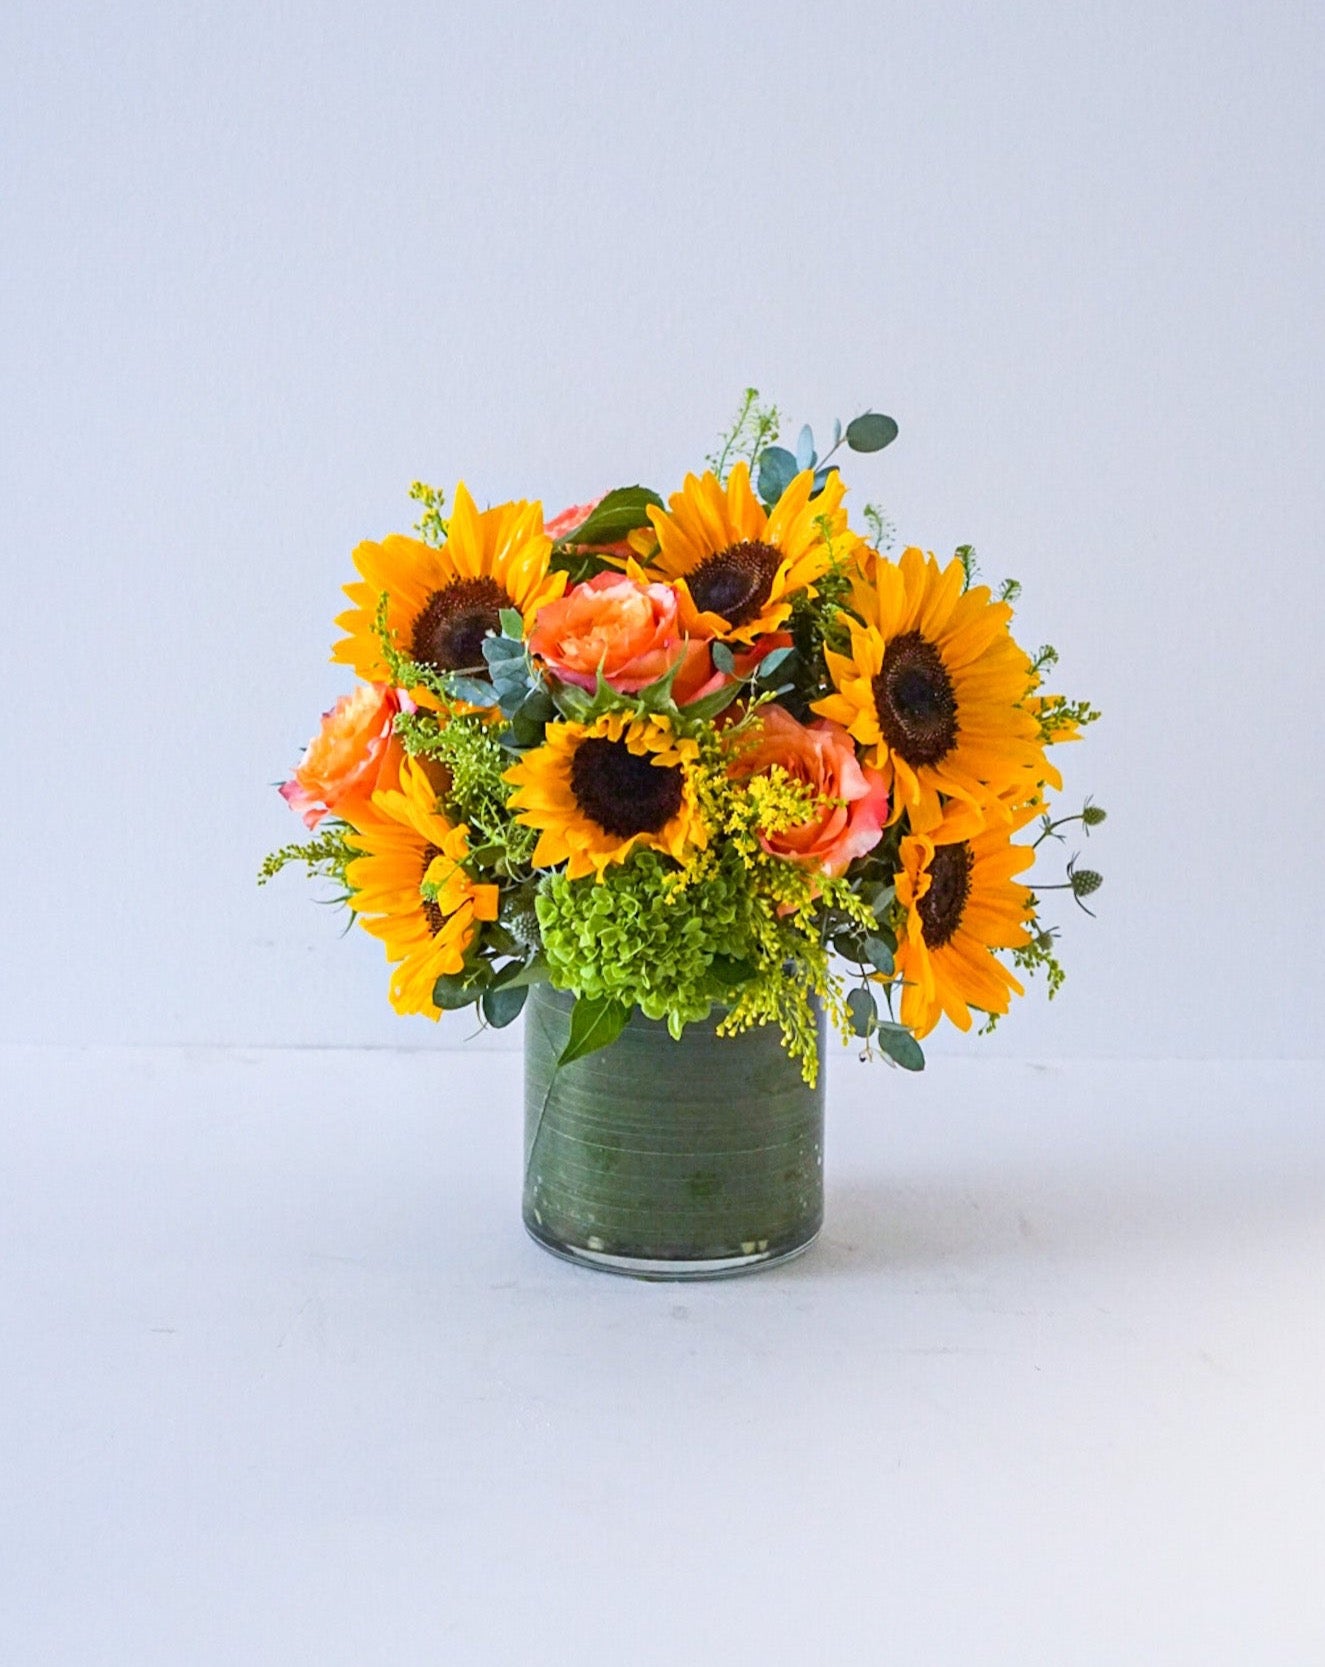 Brighten up a table, send get well wishes, or simply sprinkle sunshine on someone's day with this summer flower arrangement.  Local sunflowers steal the show in this simple arrangement. Also featured: green hydrangeas, free spirit roses, designed in the clear glass leaf-lined cylinder.